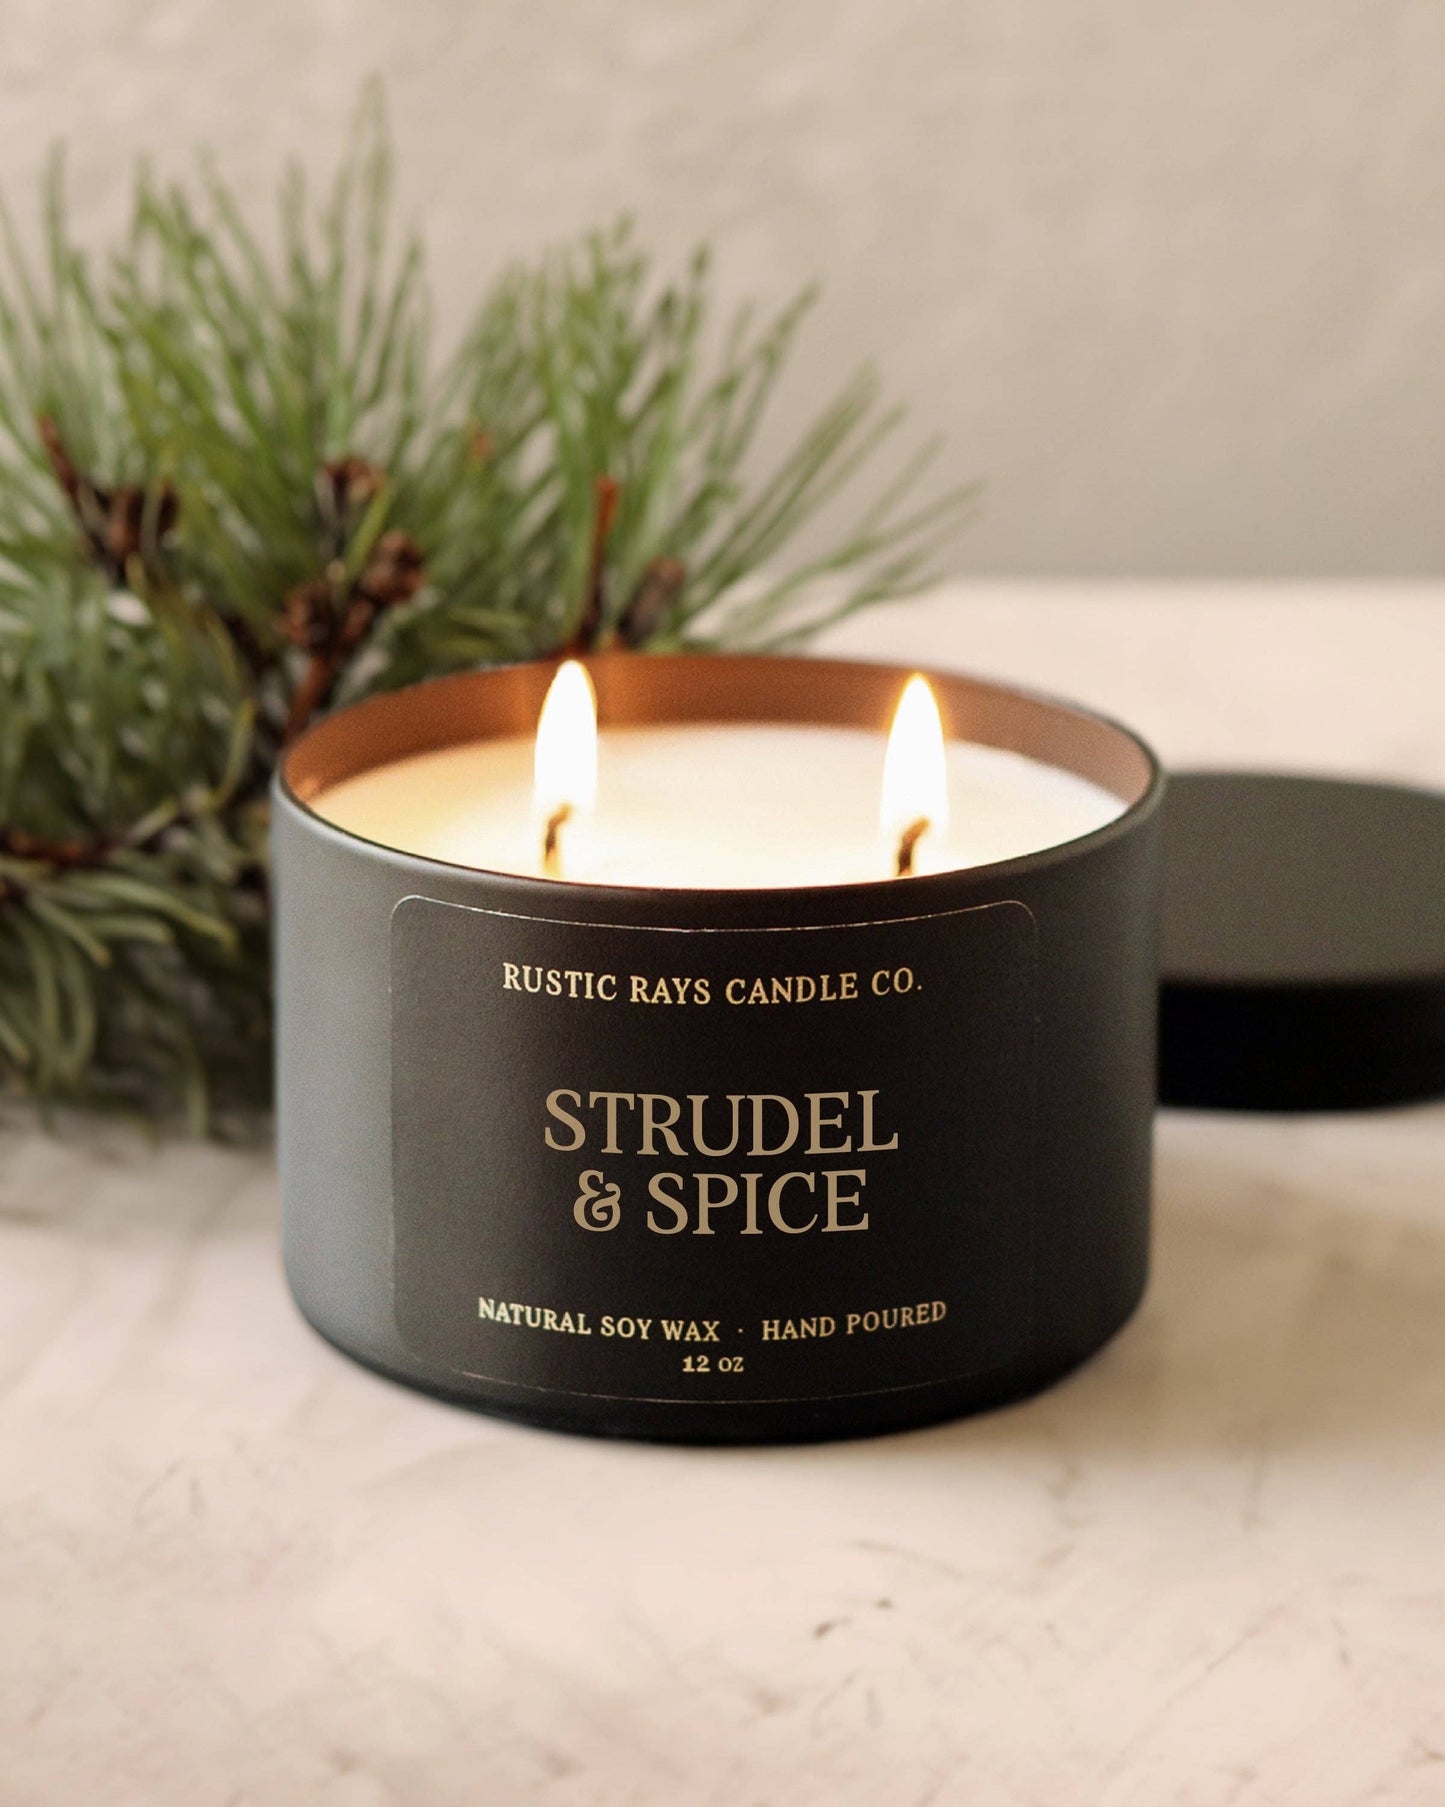 Strudel & Spice Soy Candle - Winter Candle - Black Tin -12oz